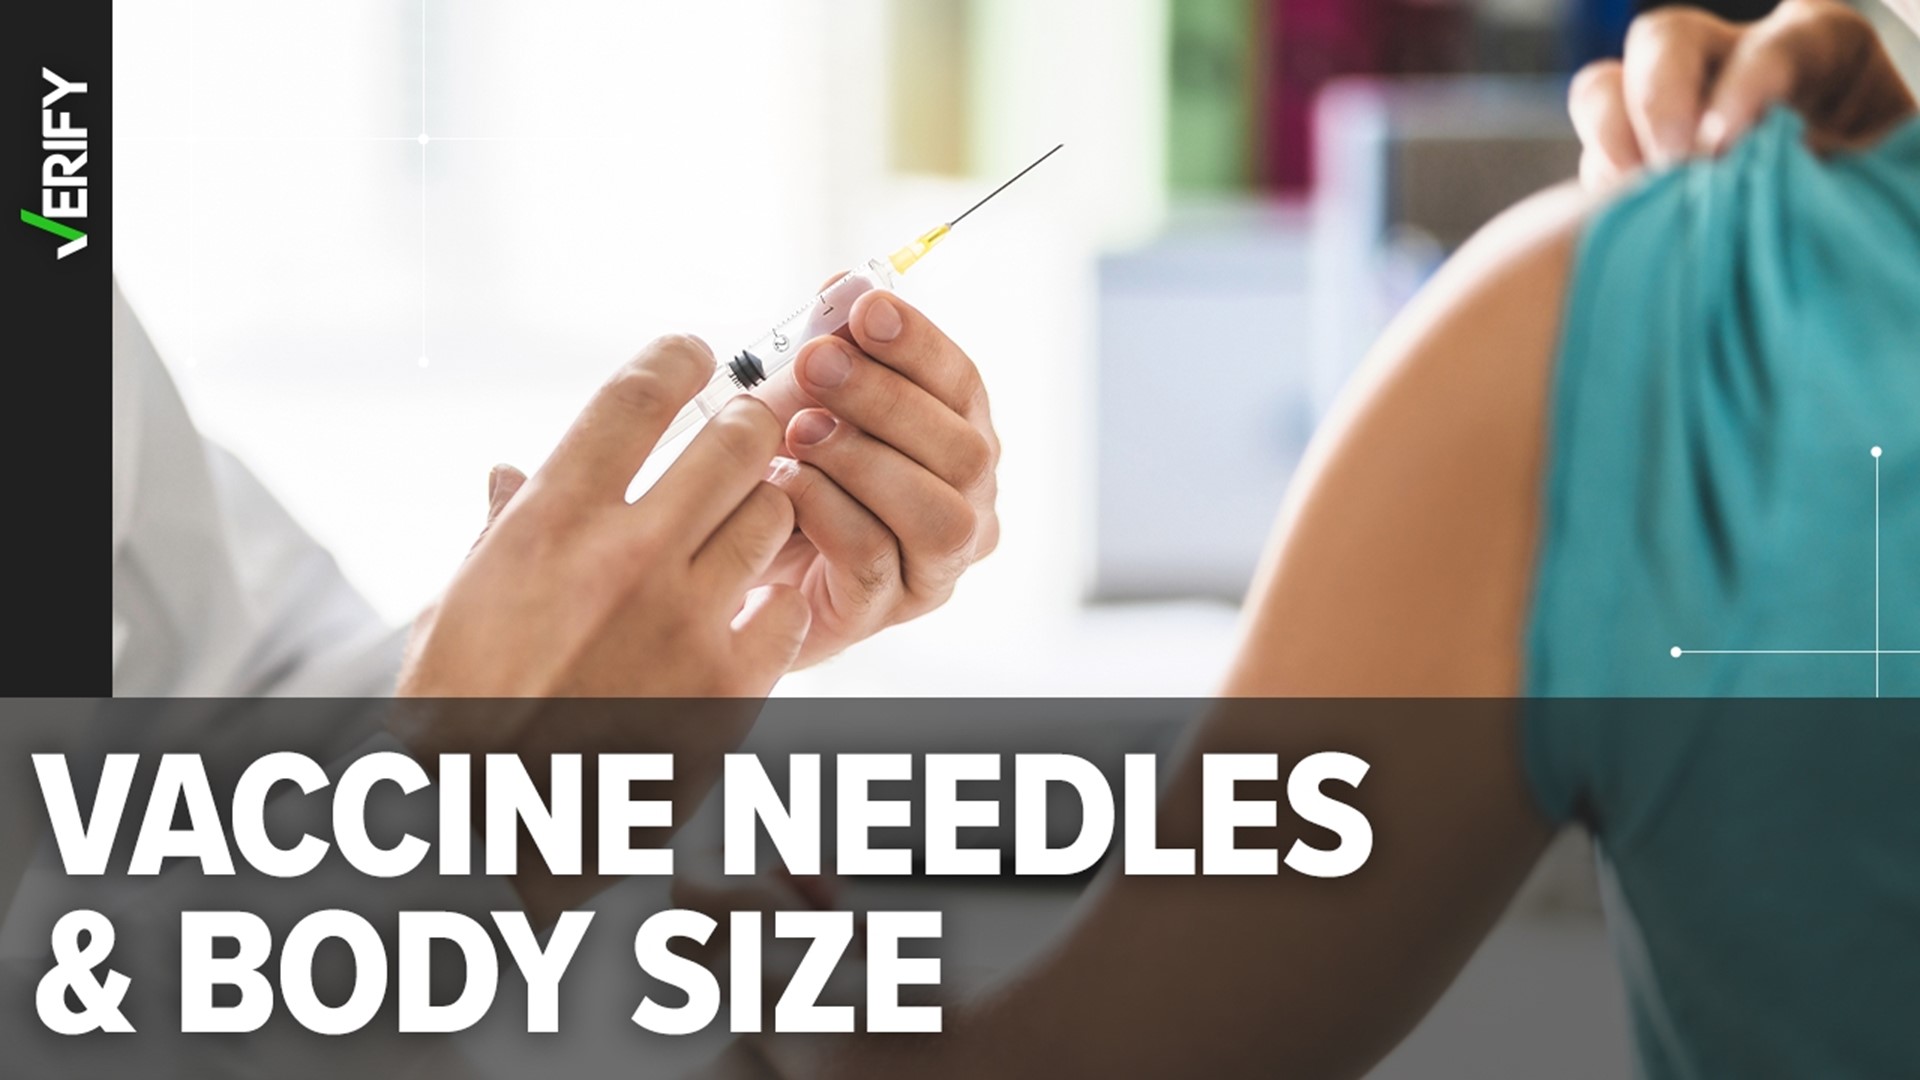 Viral posts claim people who weigh more than 200 lbs need a longer needle for vaccines. This is true.